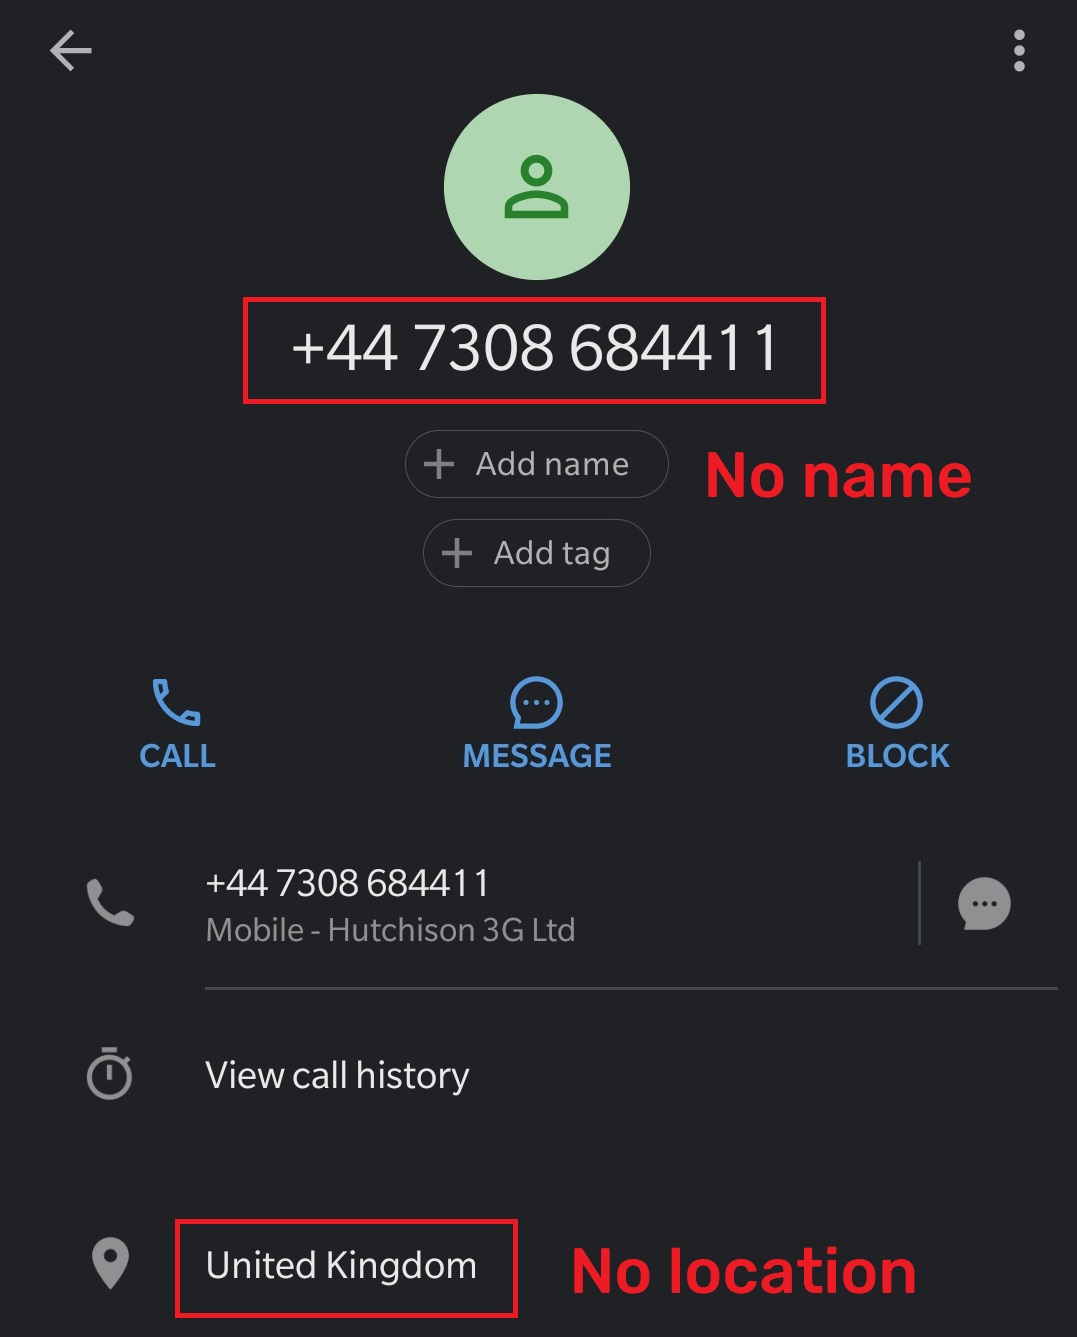 crystal trading scam fake phone number